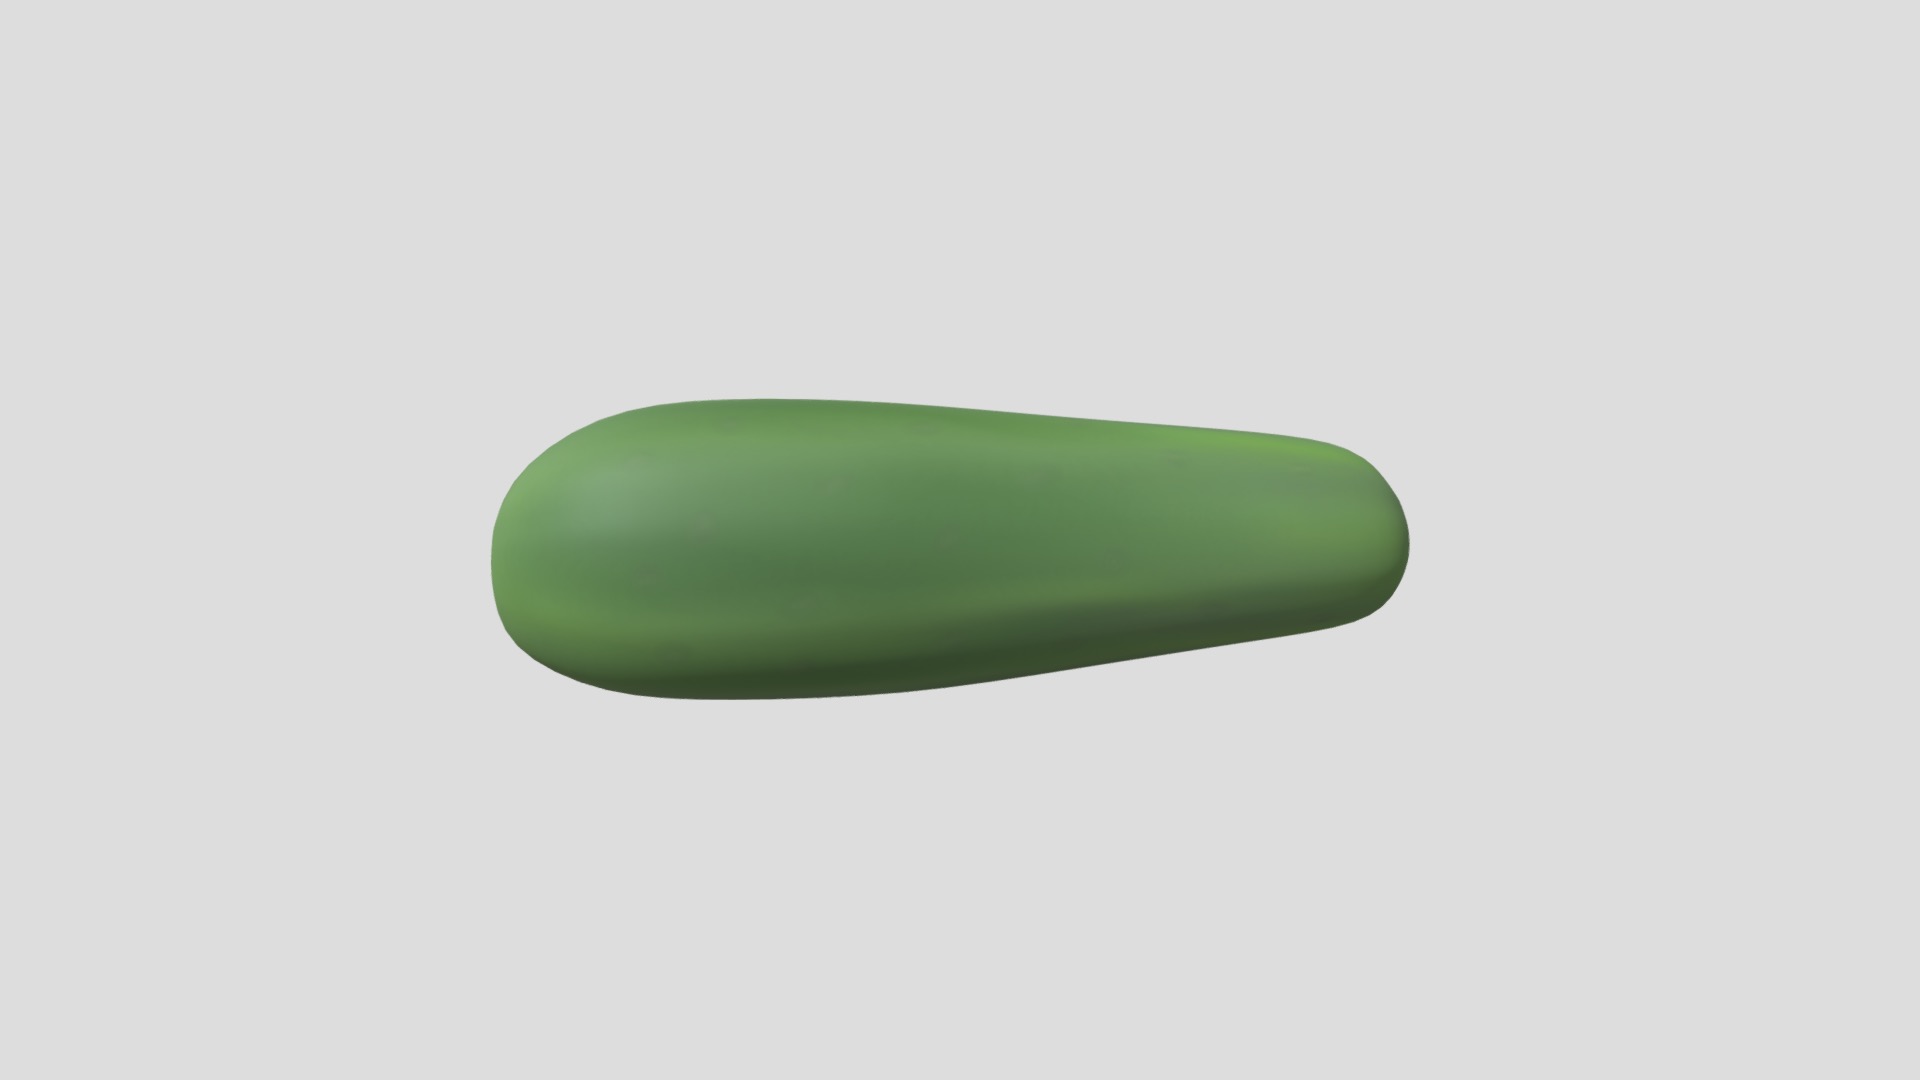 3D model Cucumber - This is a 3D model of the Cucumber. The 3D model is about a cucumber on a white background.